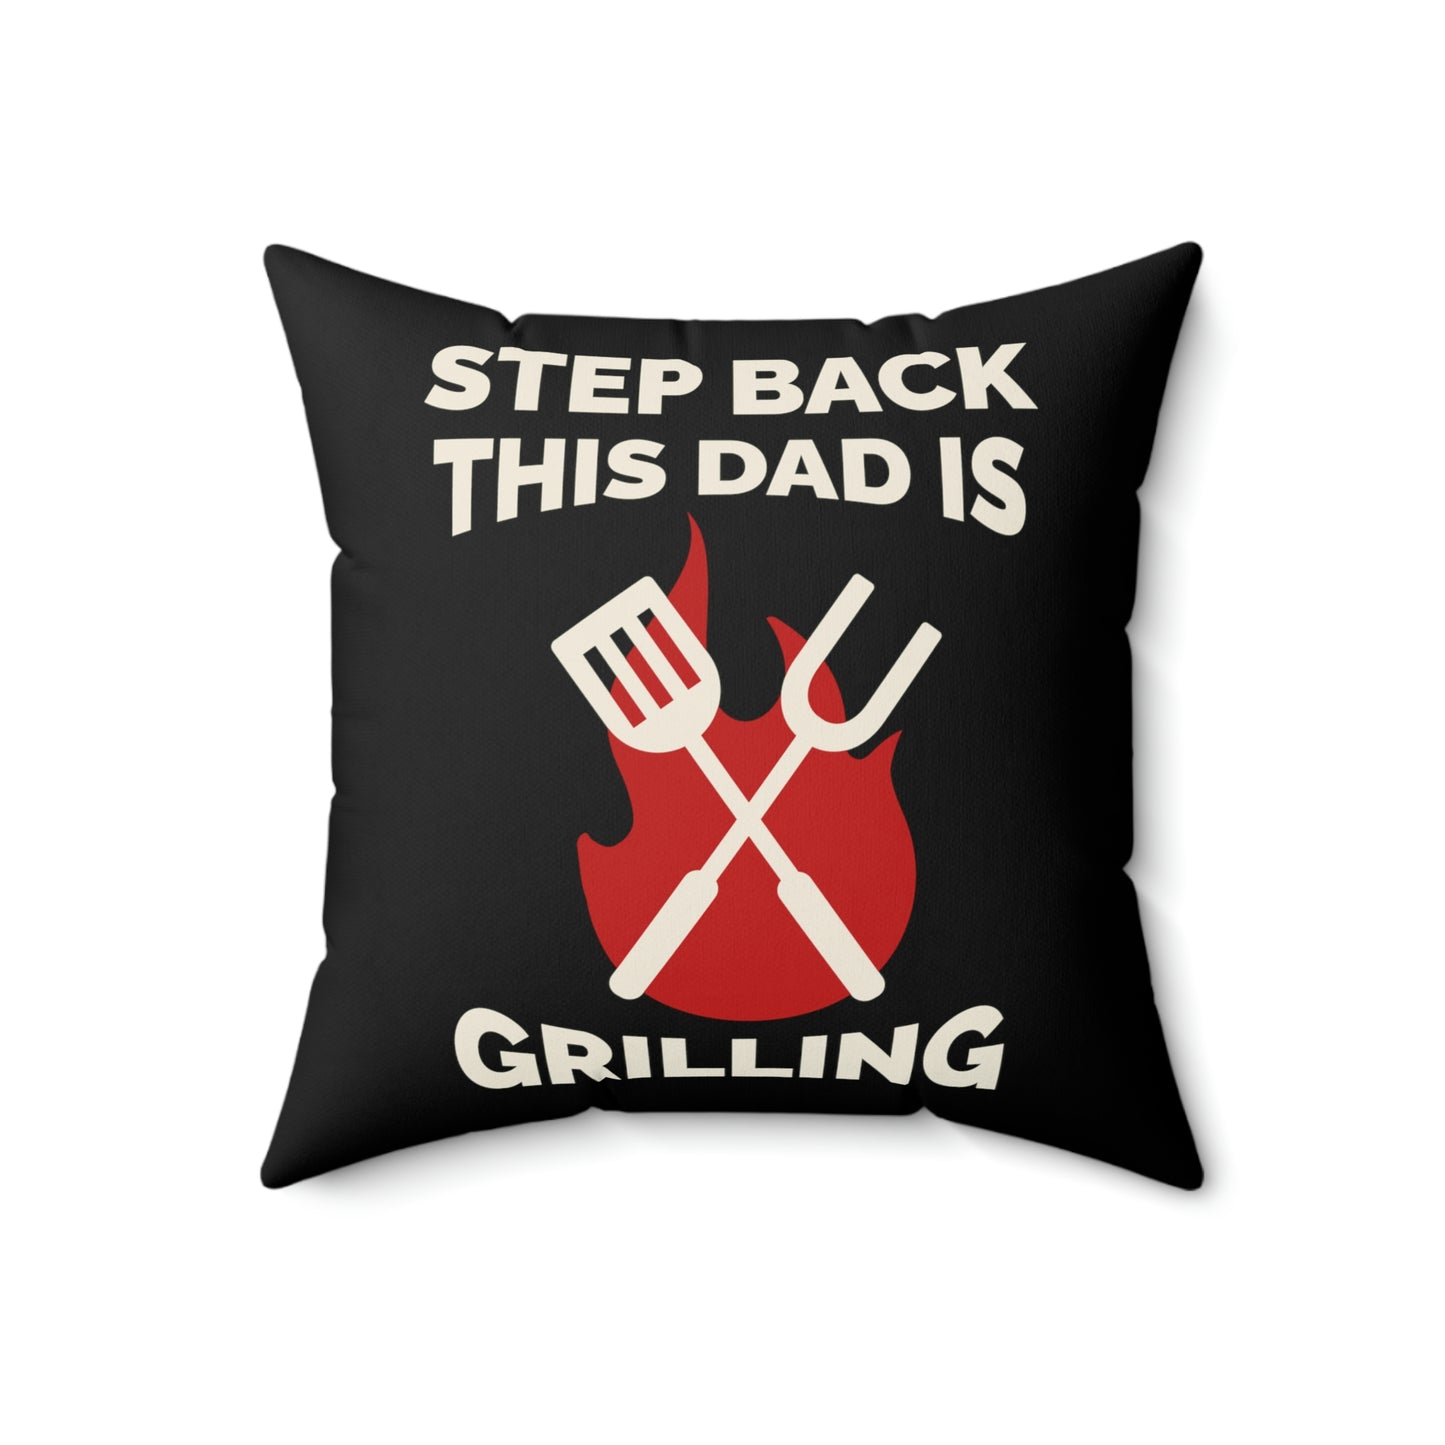 Spun Polyester Square Pillow Case "Step Back This Dad Is Grilling on Black”